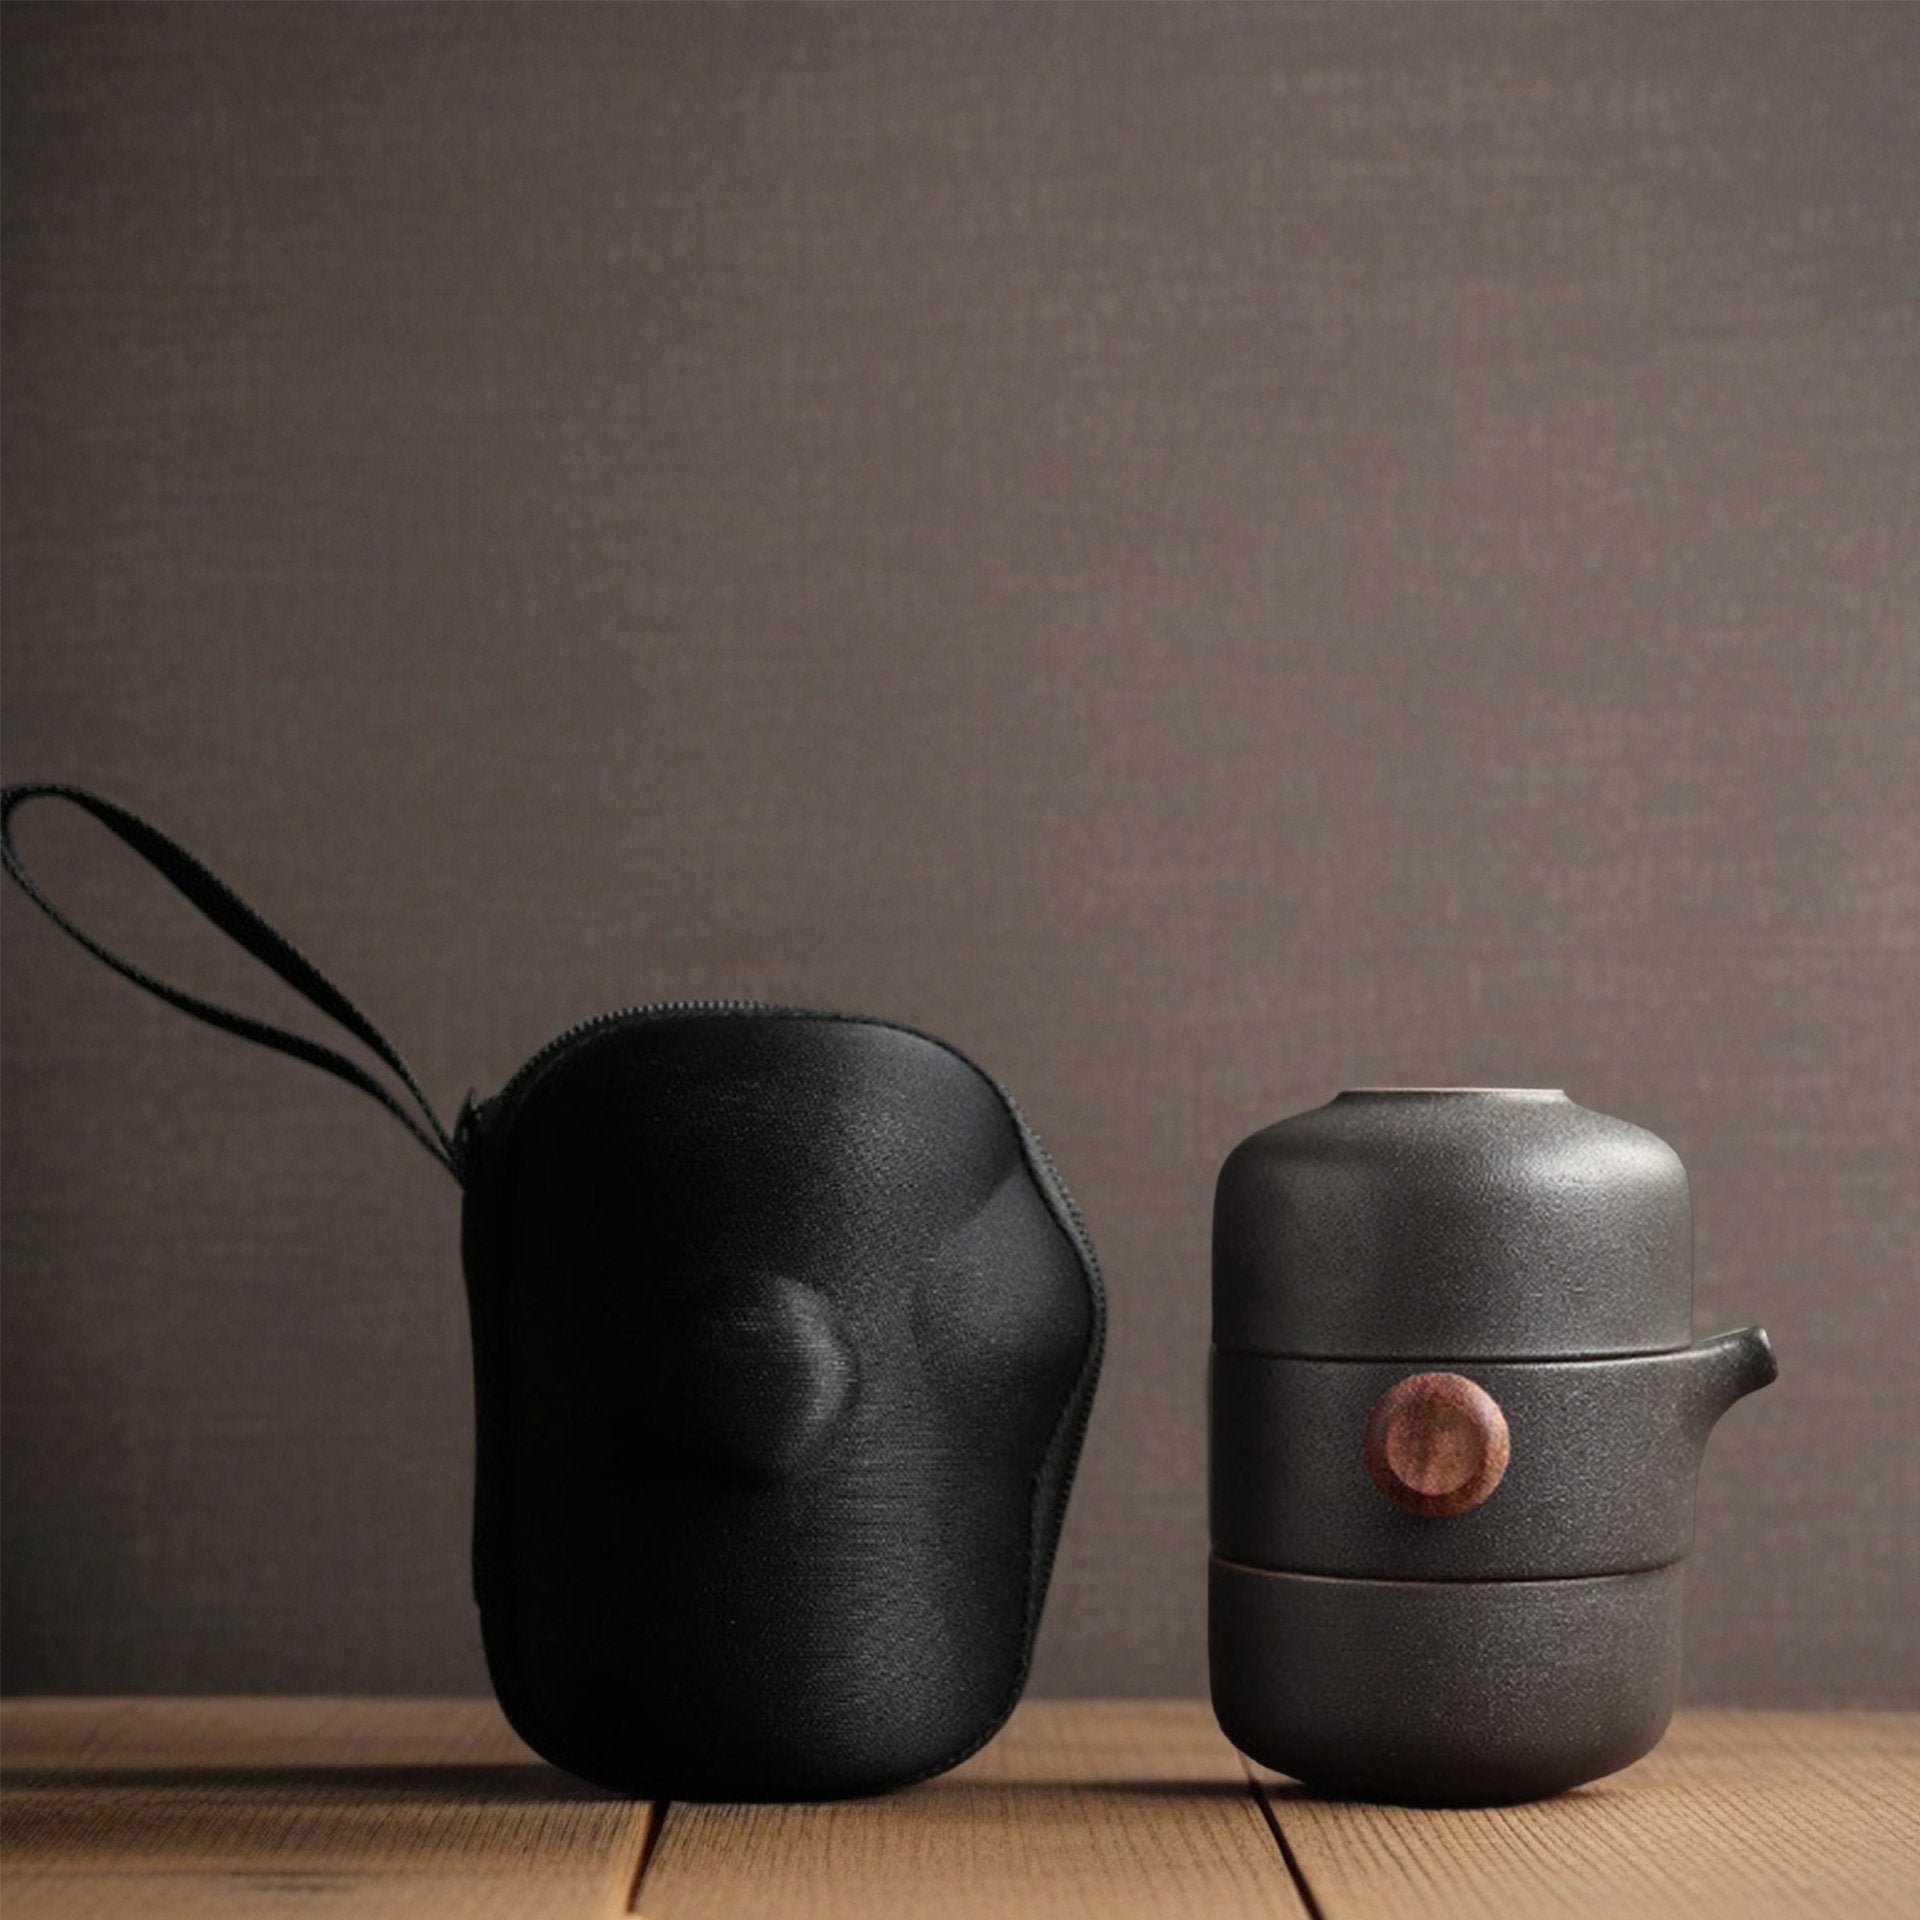  Black ceramic teapot with lid and carrying case on table.